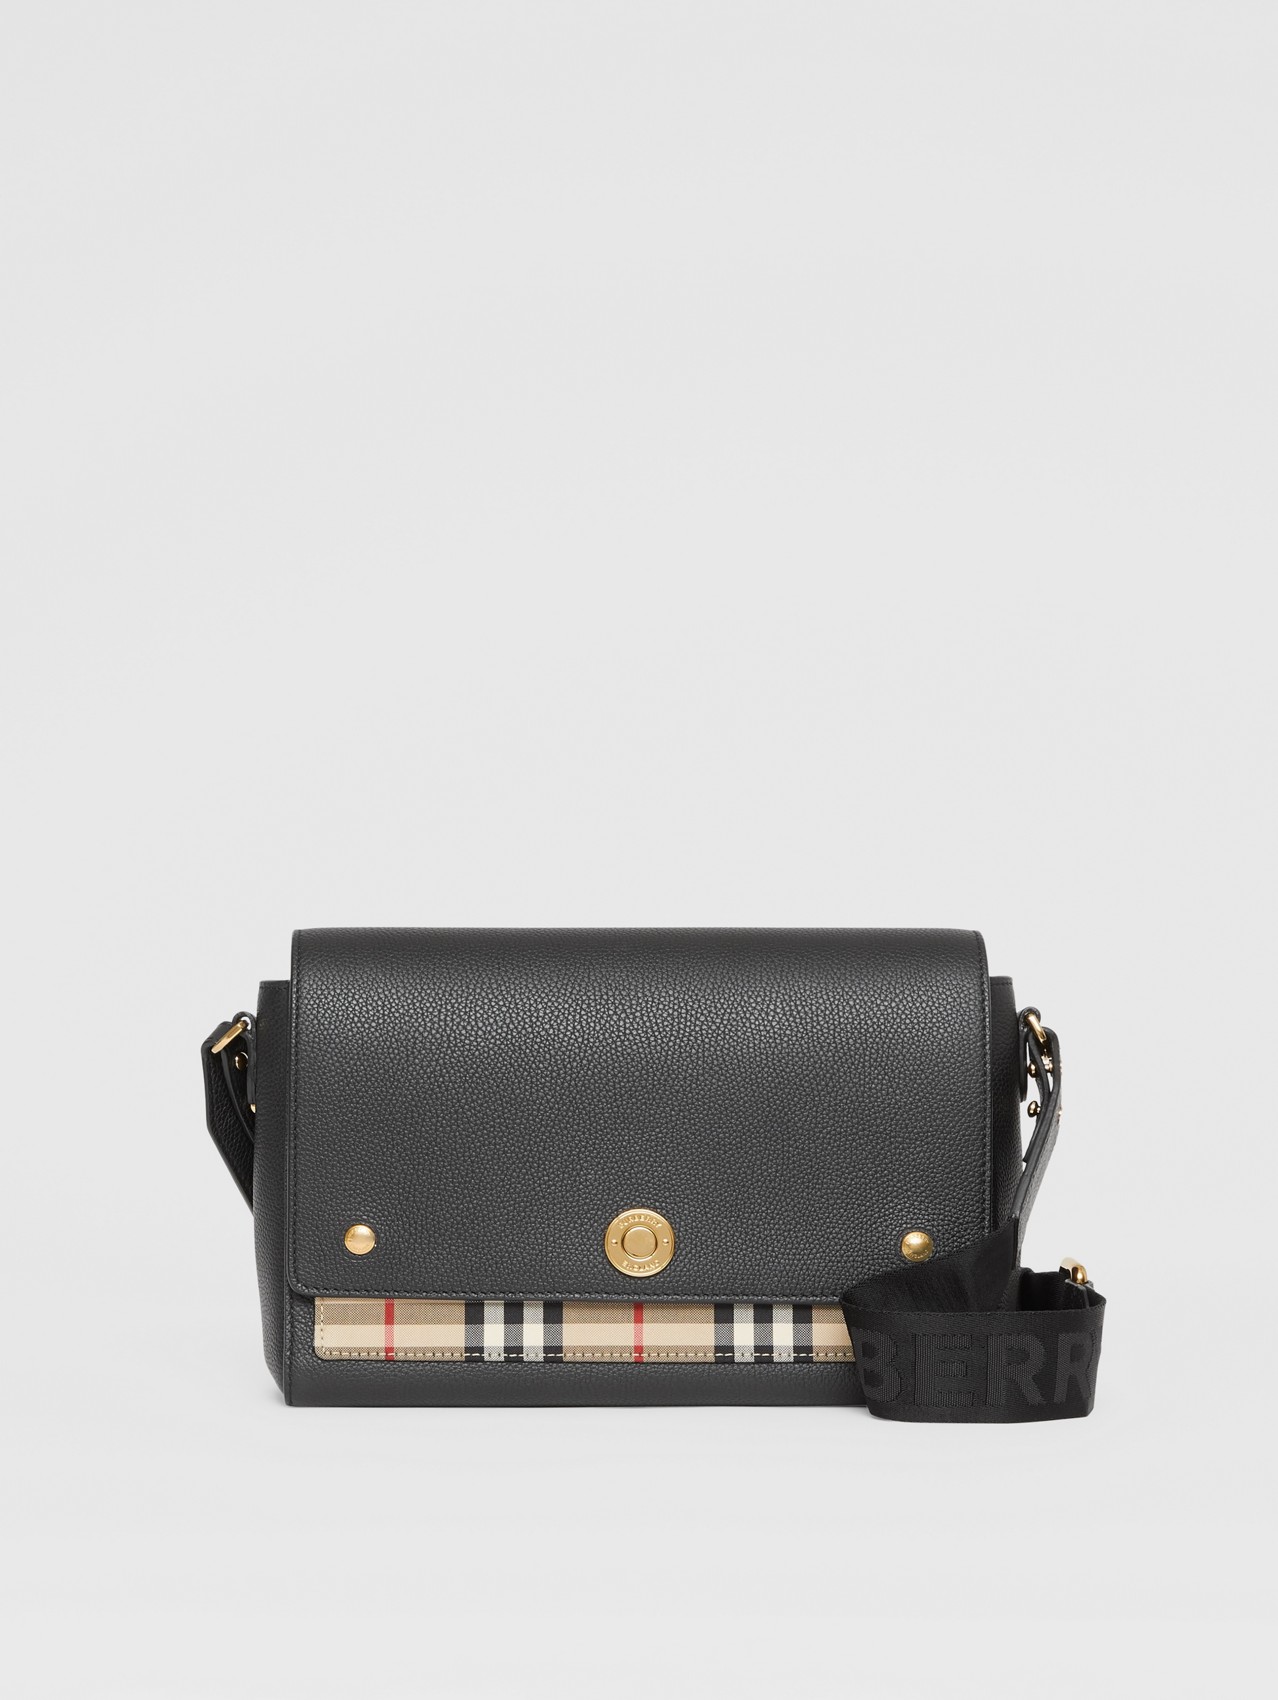 Leather and Vintage Check Note Crossbody Bag in Black